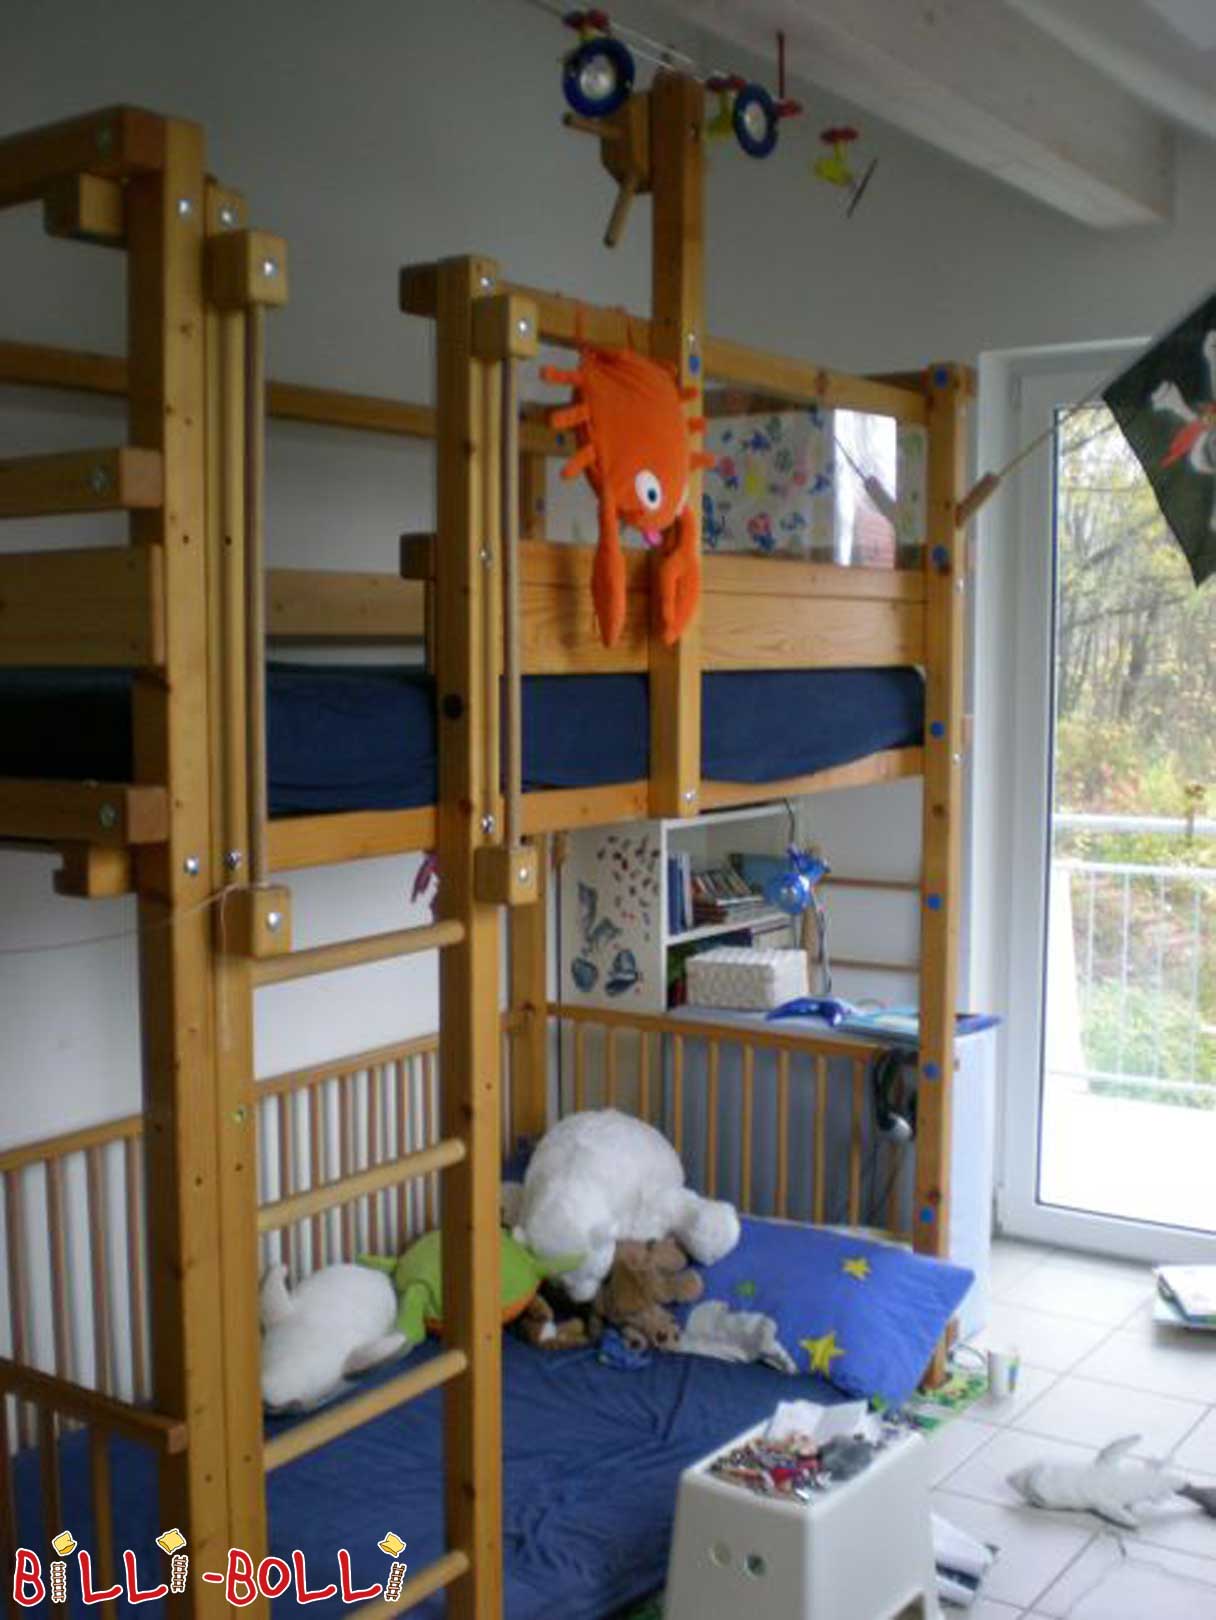 Billi-Bolli loft bed that grows with the child (Category: second hand loft bed)